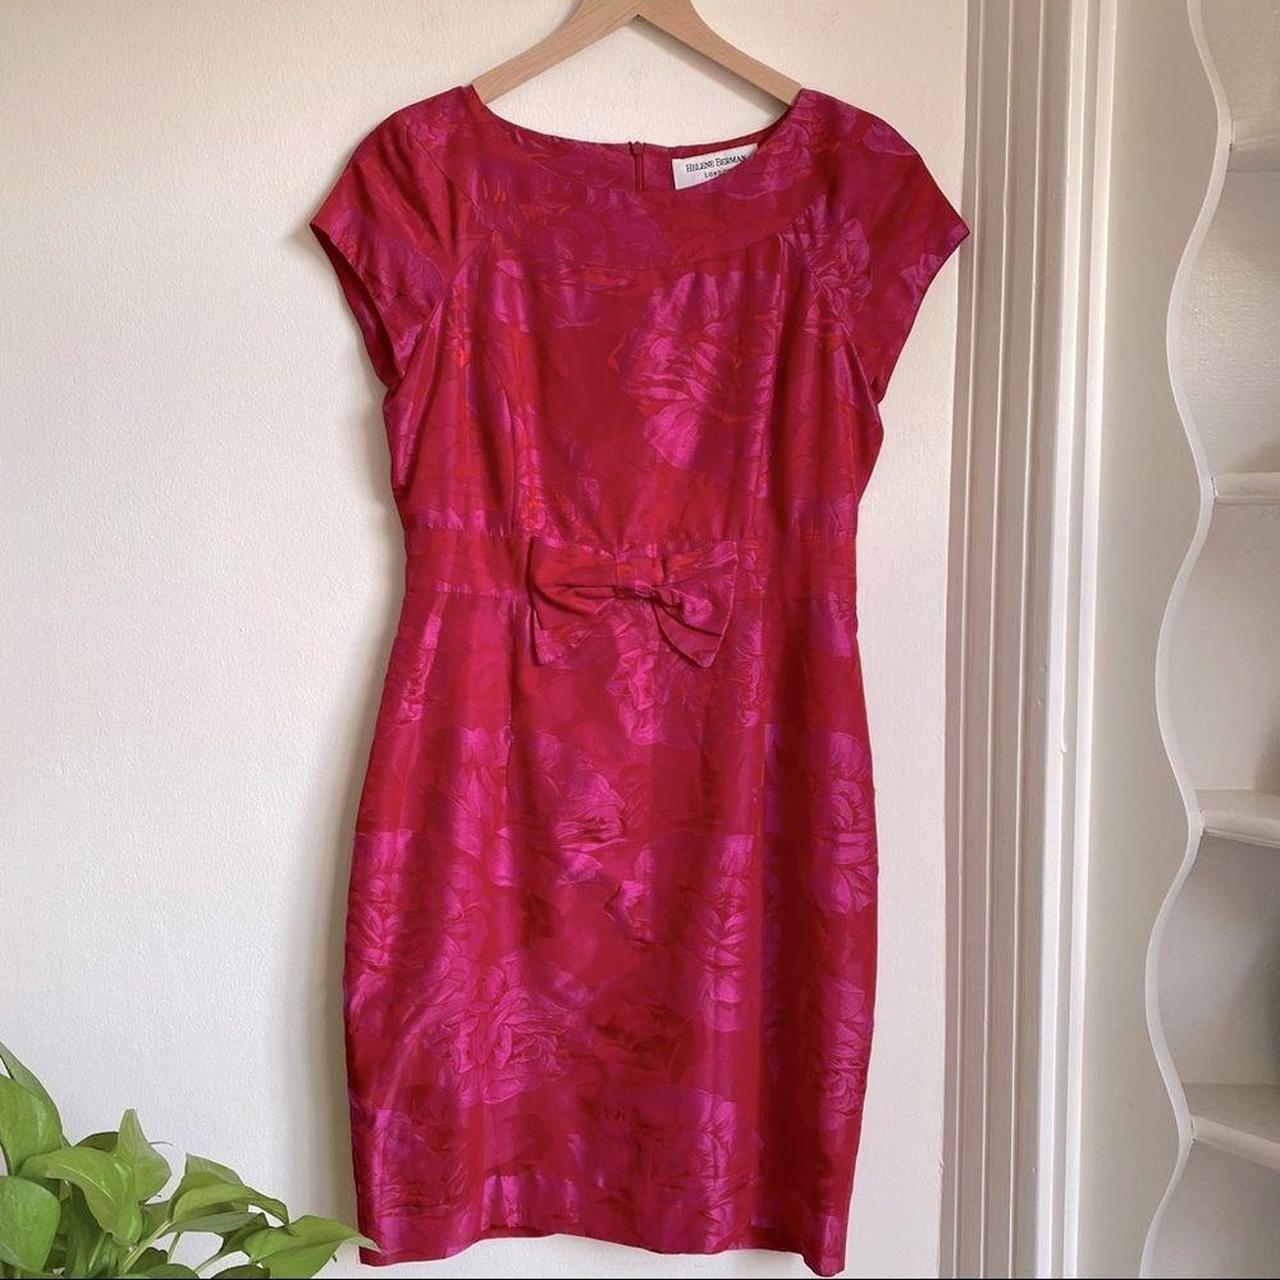 Product Image 1 - Vintage Floral Brocade Dress

Gorgeously lush